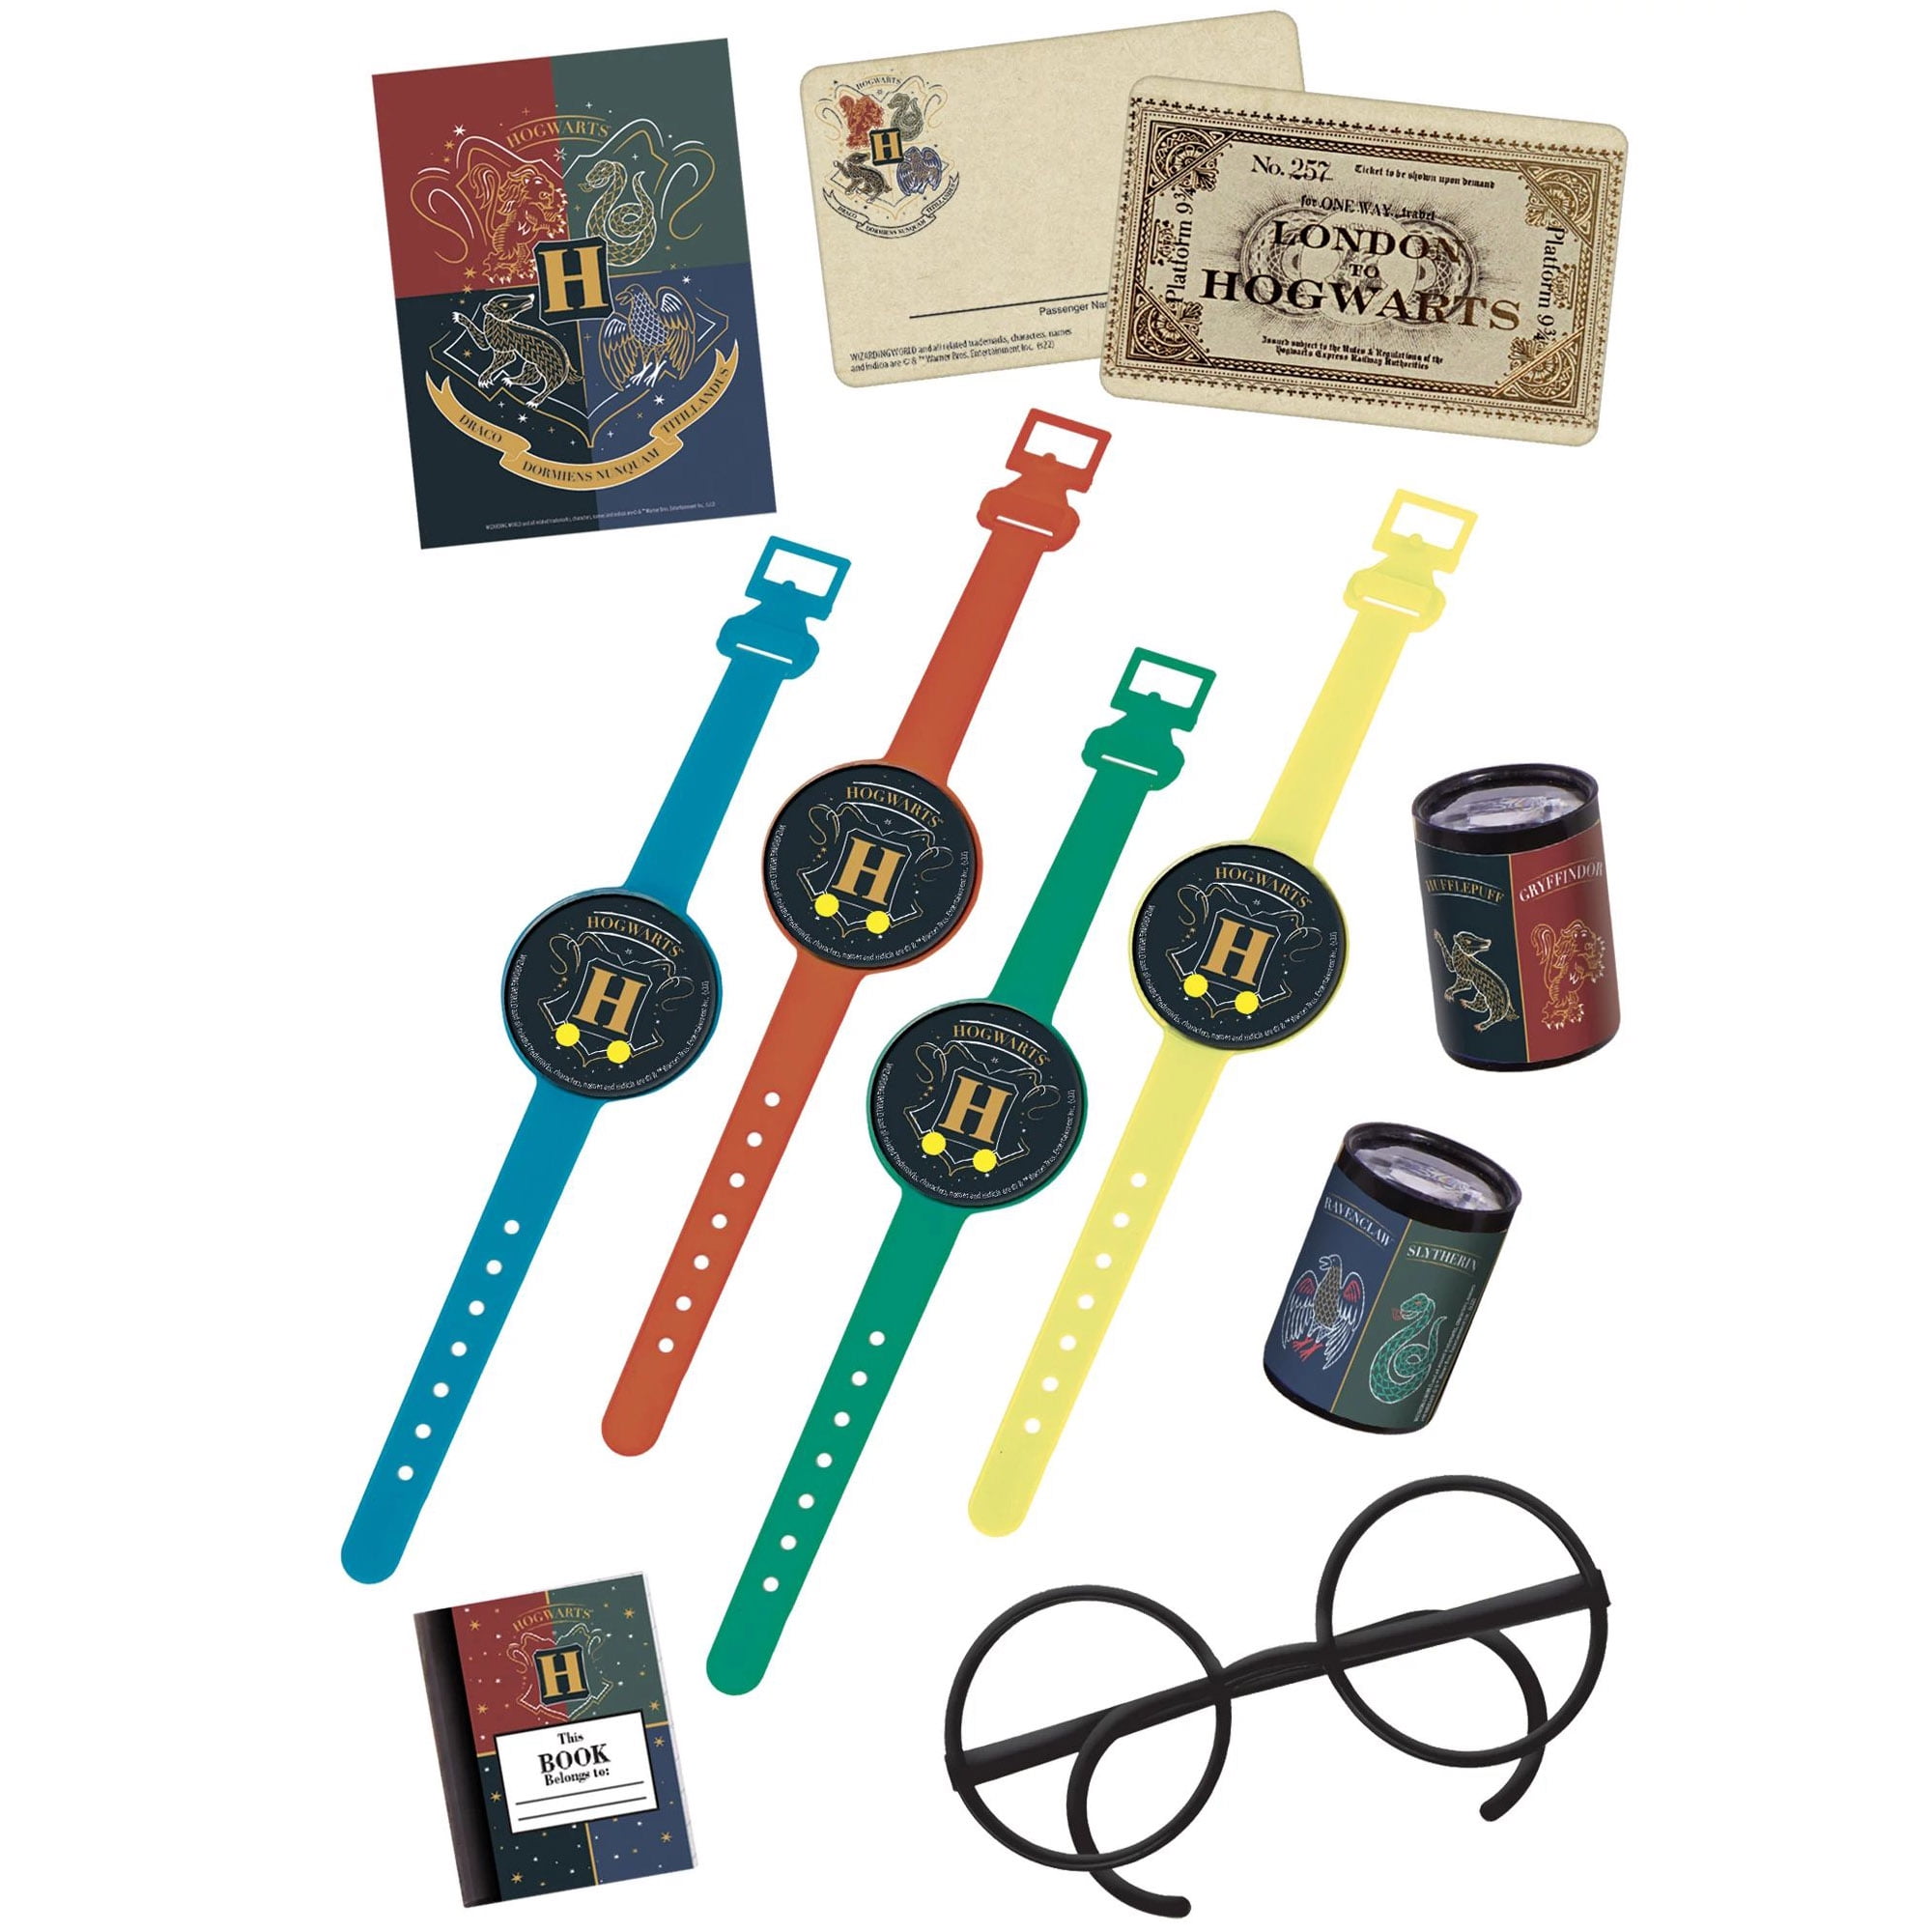  Harry Potter Birthday Party Favors Set - Bundle with 24 Harry  Potter Play Packs  Mini Coloring Books, Stickers, and More for Goodie Bags  (Harry Potter Party Supplies) : Toys & Games